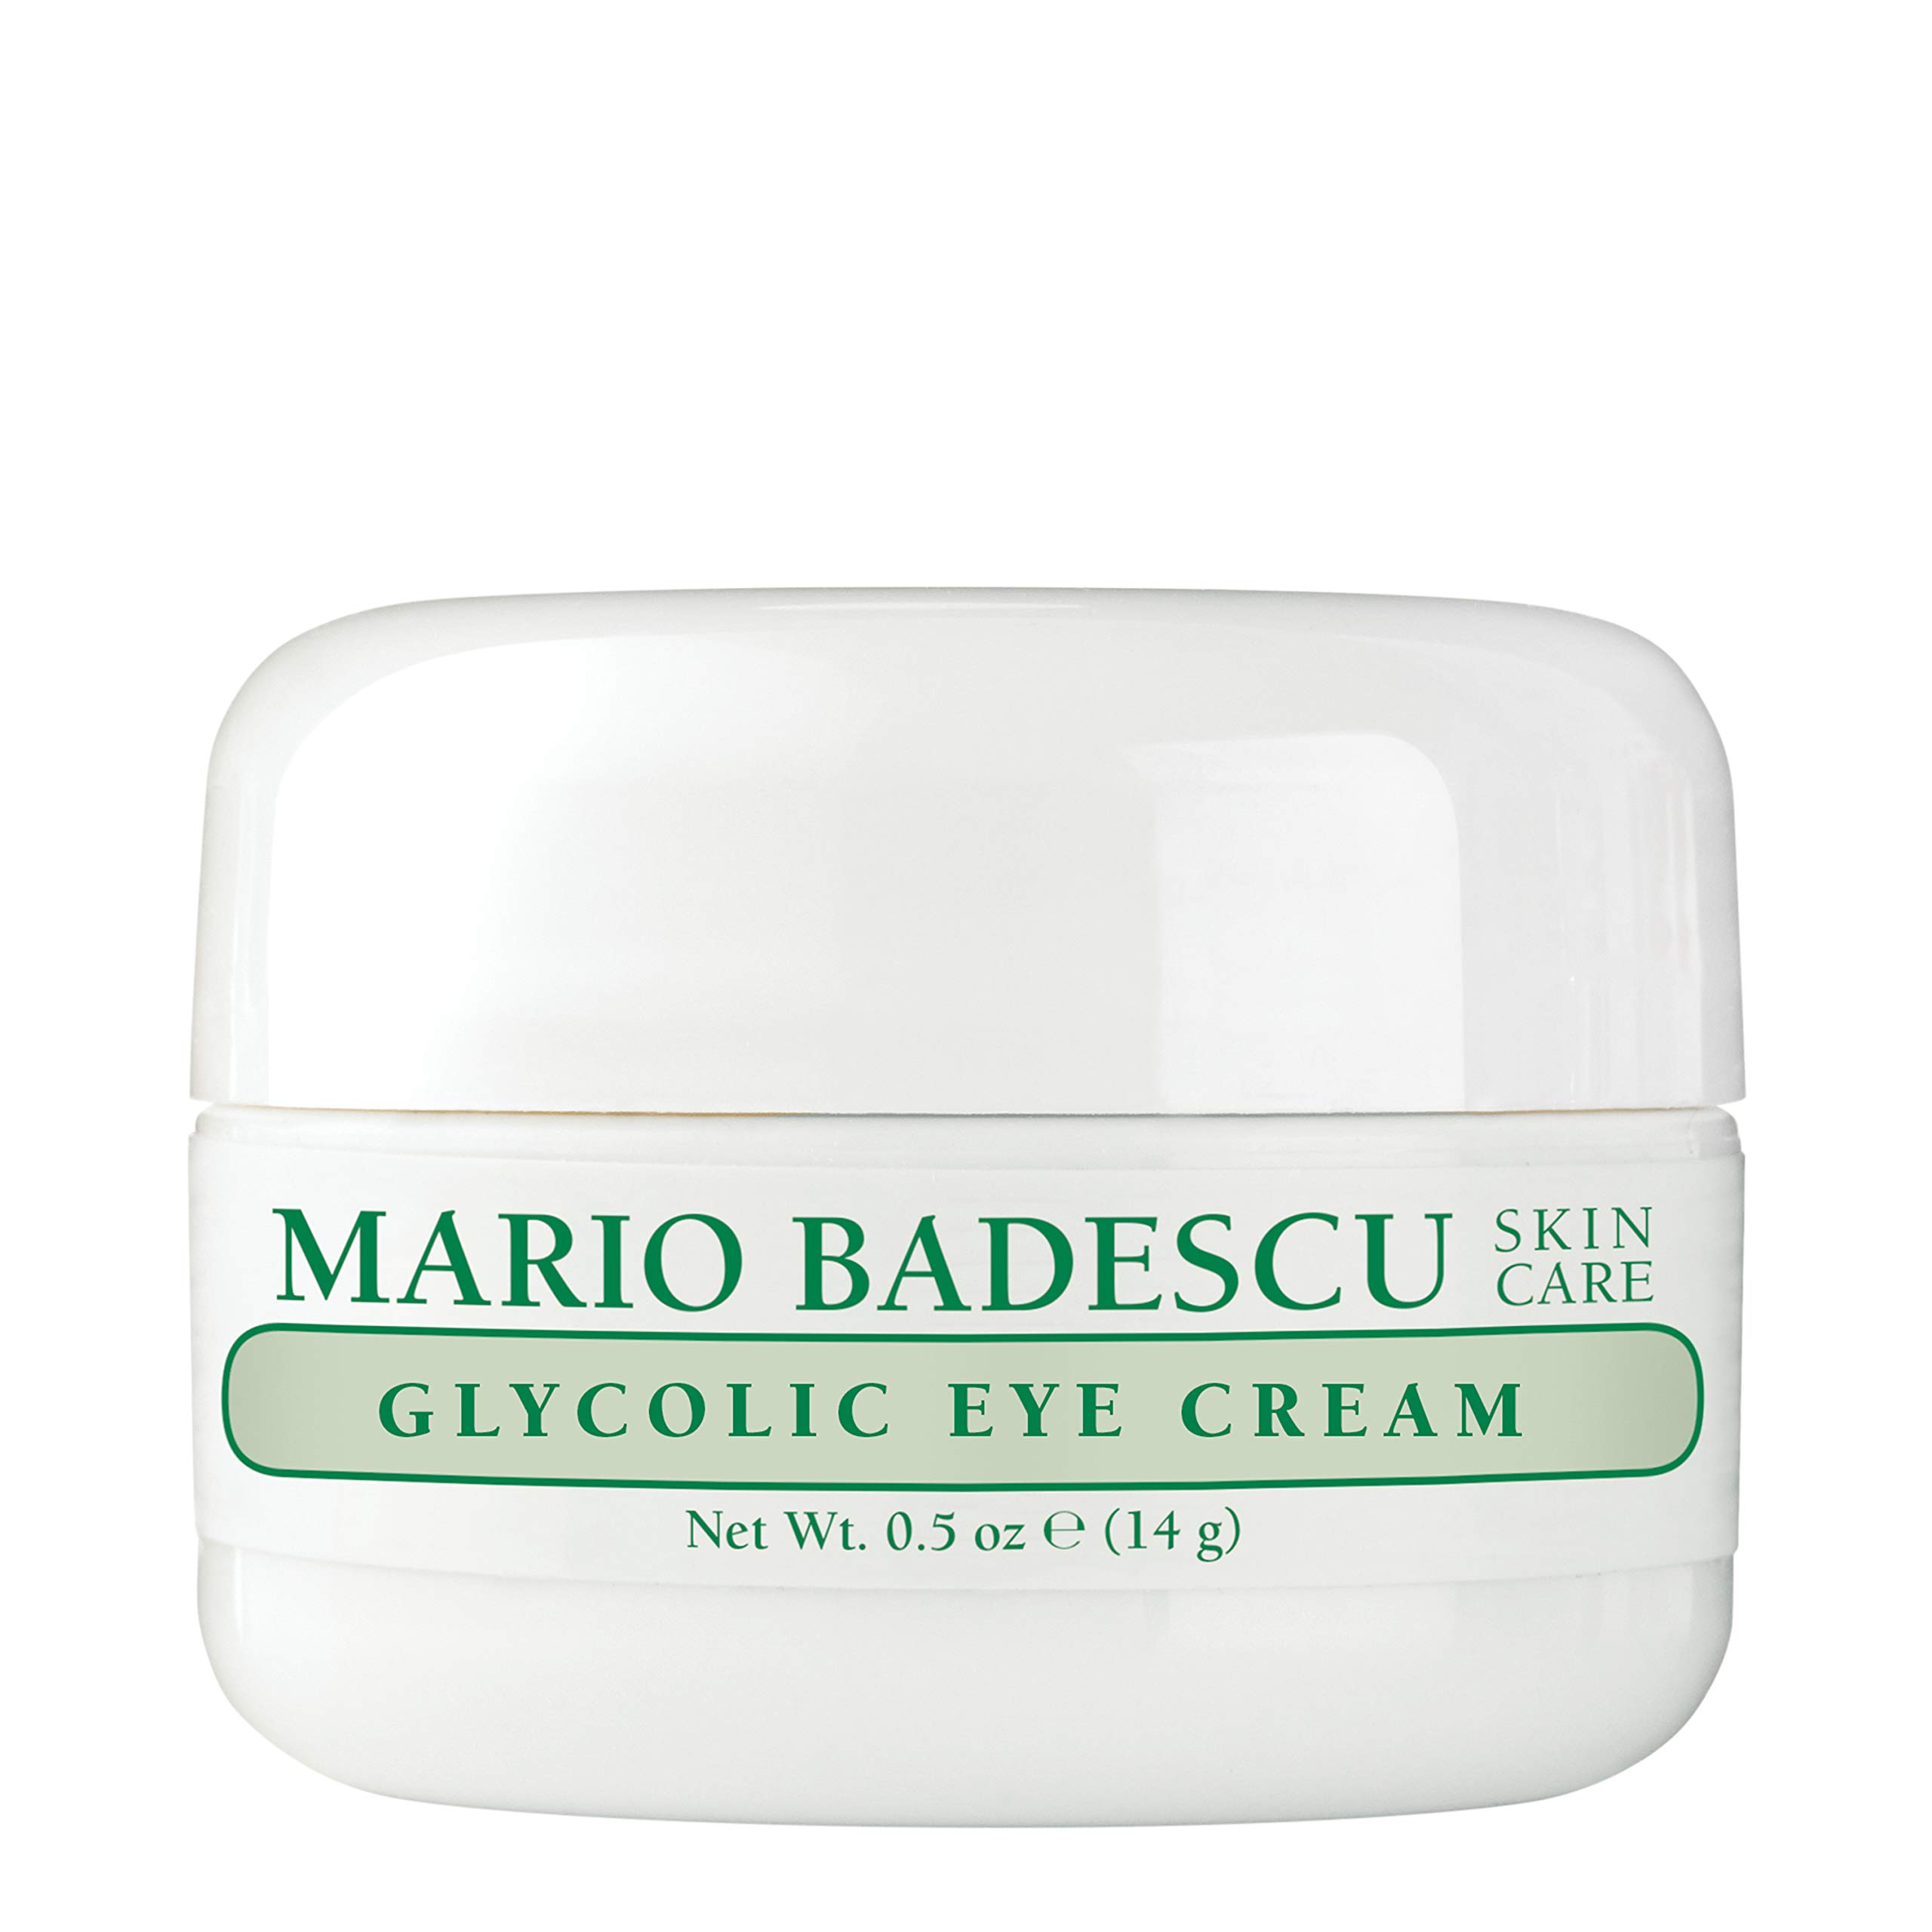 Mario Badescu Glycolic Eye Cream Anti Aging Skin Care for Fine Lines and Wrinkles, Overnight Eye Moisturizer with Vitamin E, AHA and Cocoa Butter for Combination or Dry Skin, 0.5 Ounce (Pack of 1)